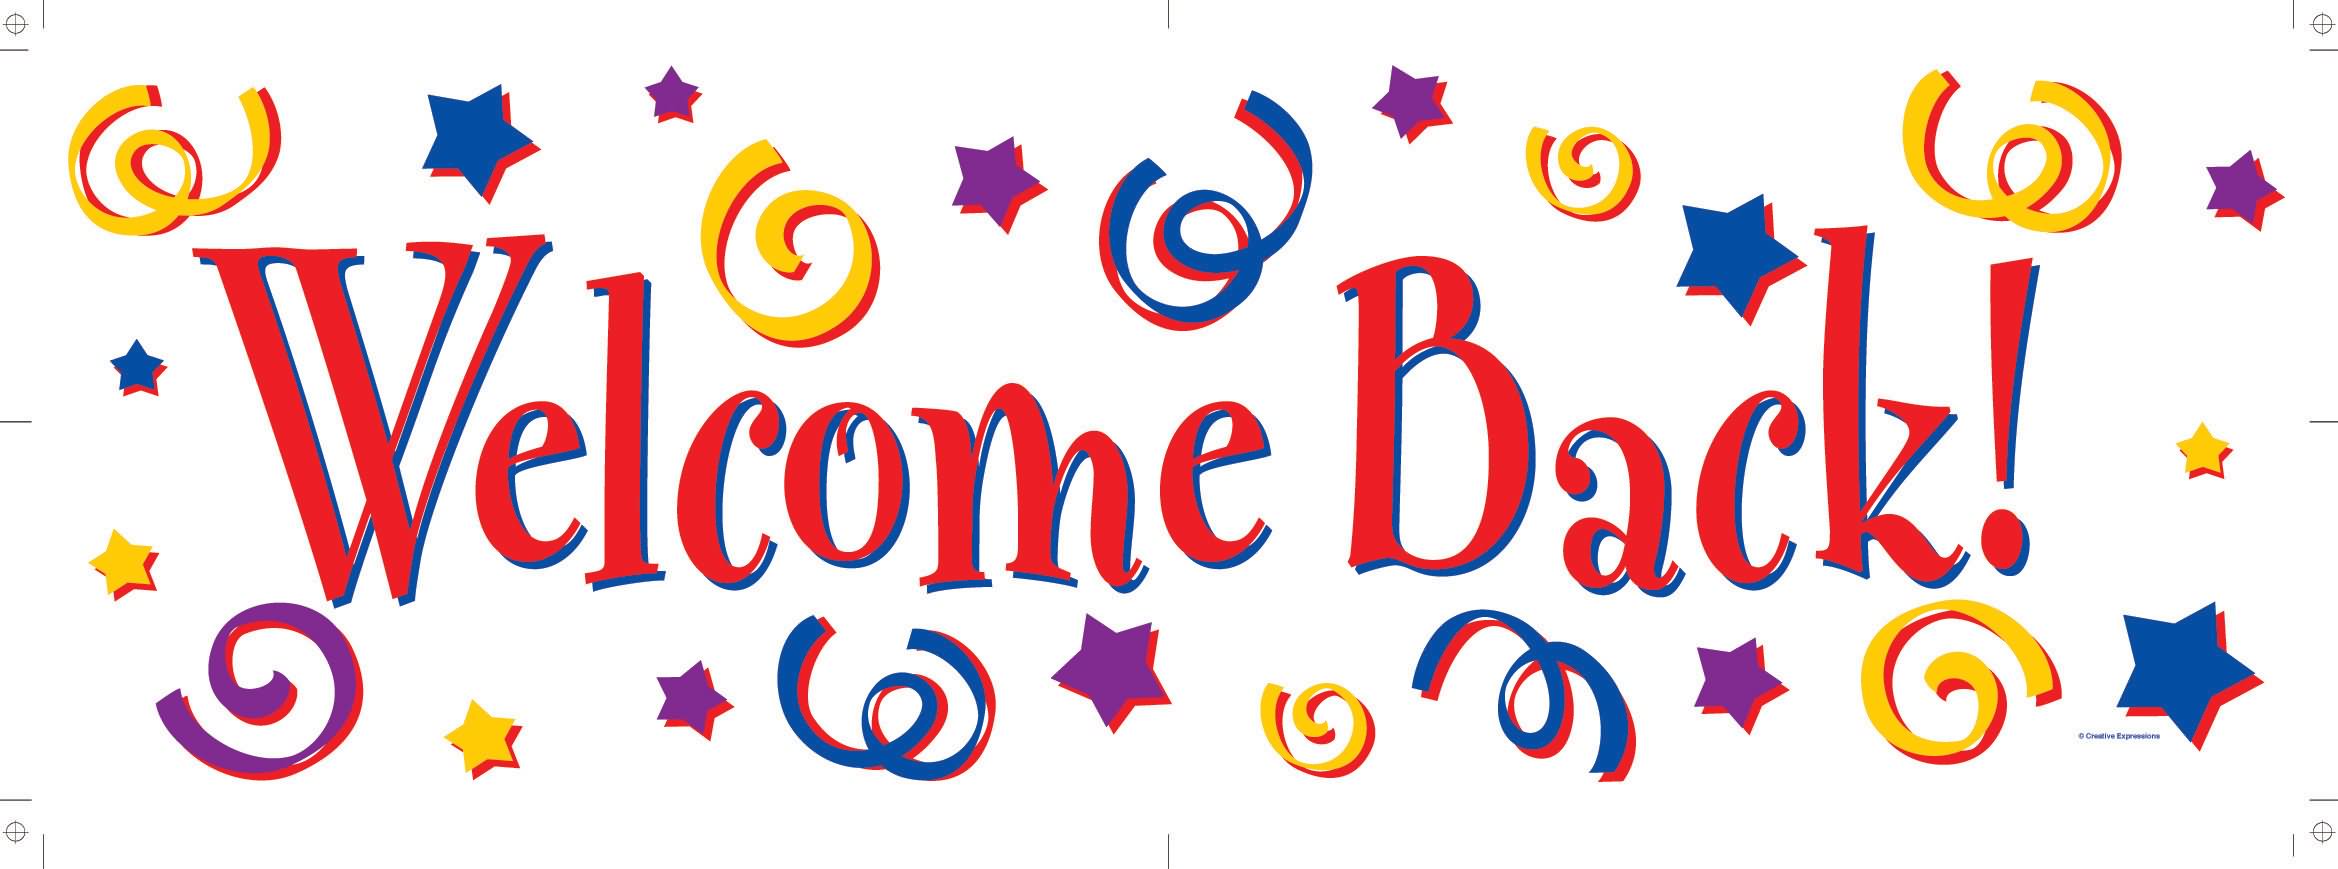 Welcome back sign clipart clipartfox